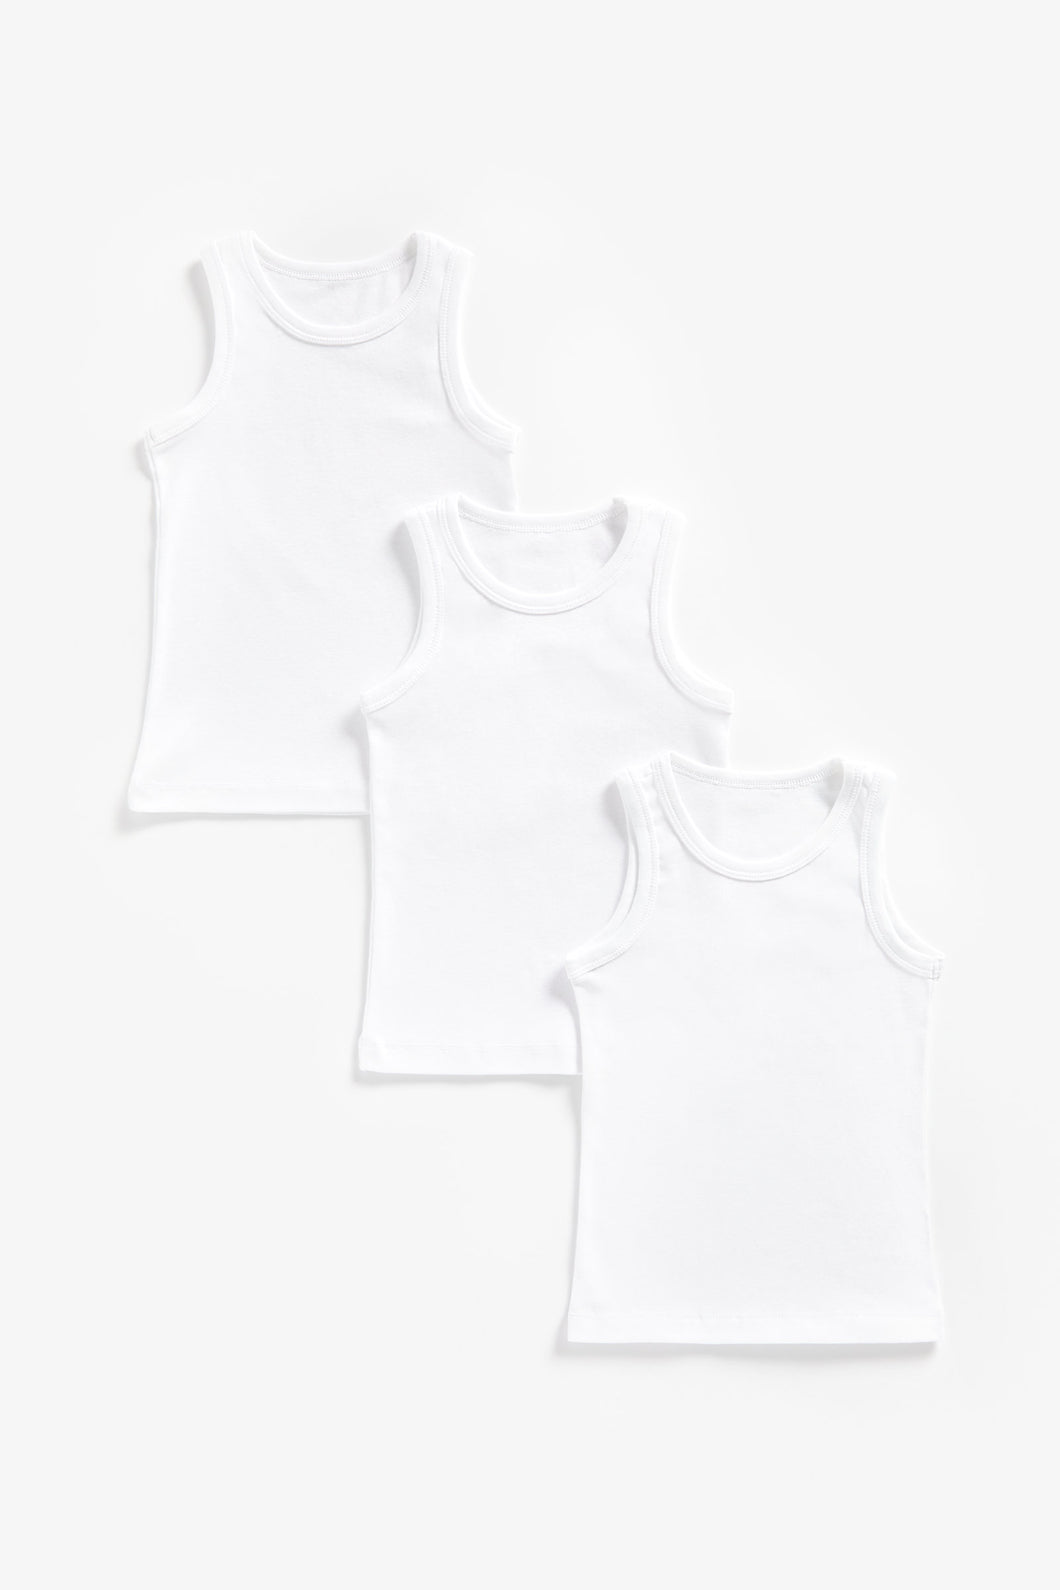 Mothercare White Vests - 3 Pack